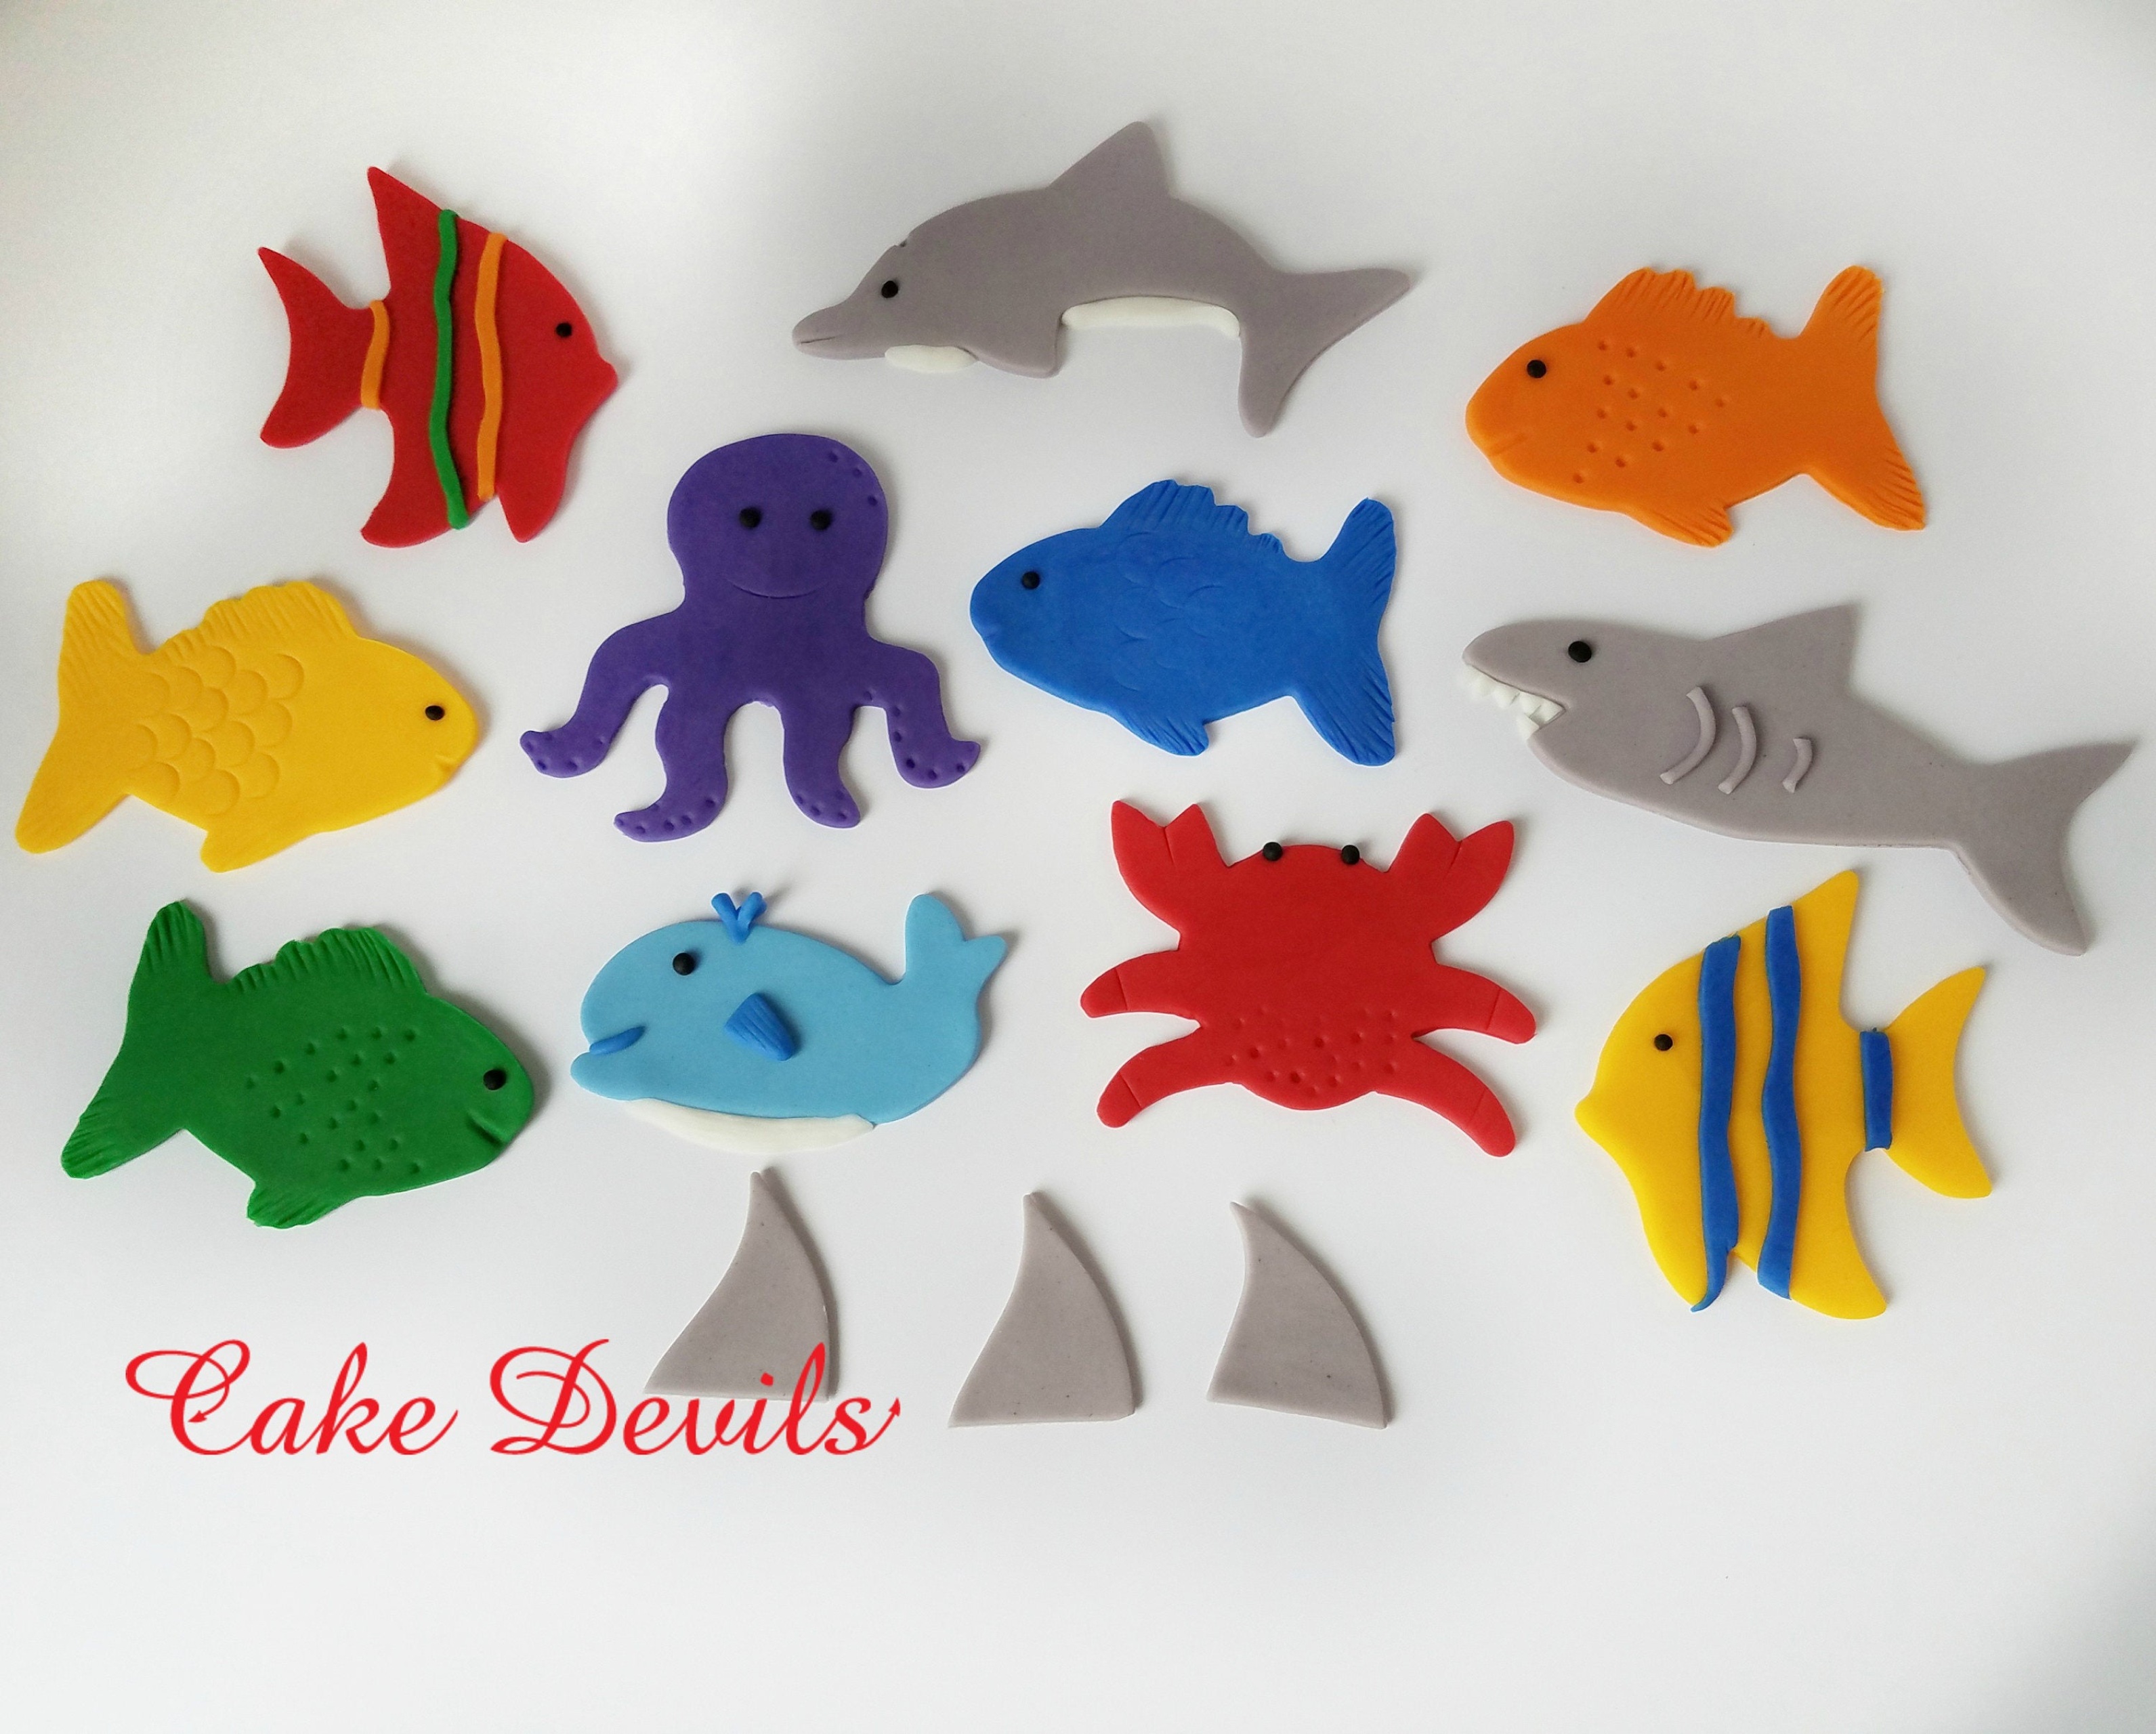 Ocean Life Fondant Cake Toppers, Fish Cake Decorations, Beach Party, Shark,  Dolphin, Crab, Whale, Octopus, Handmade Edible Sea Creatures